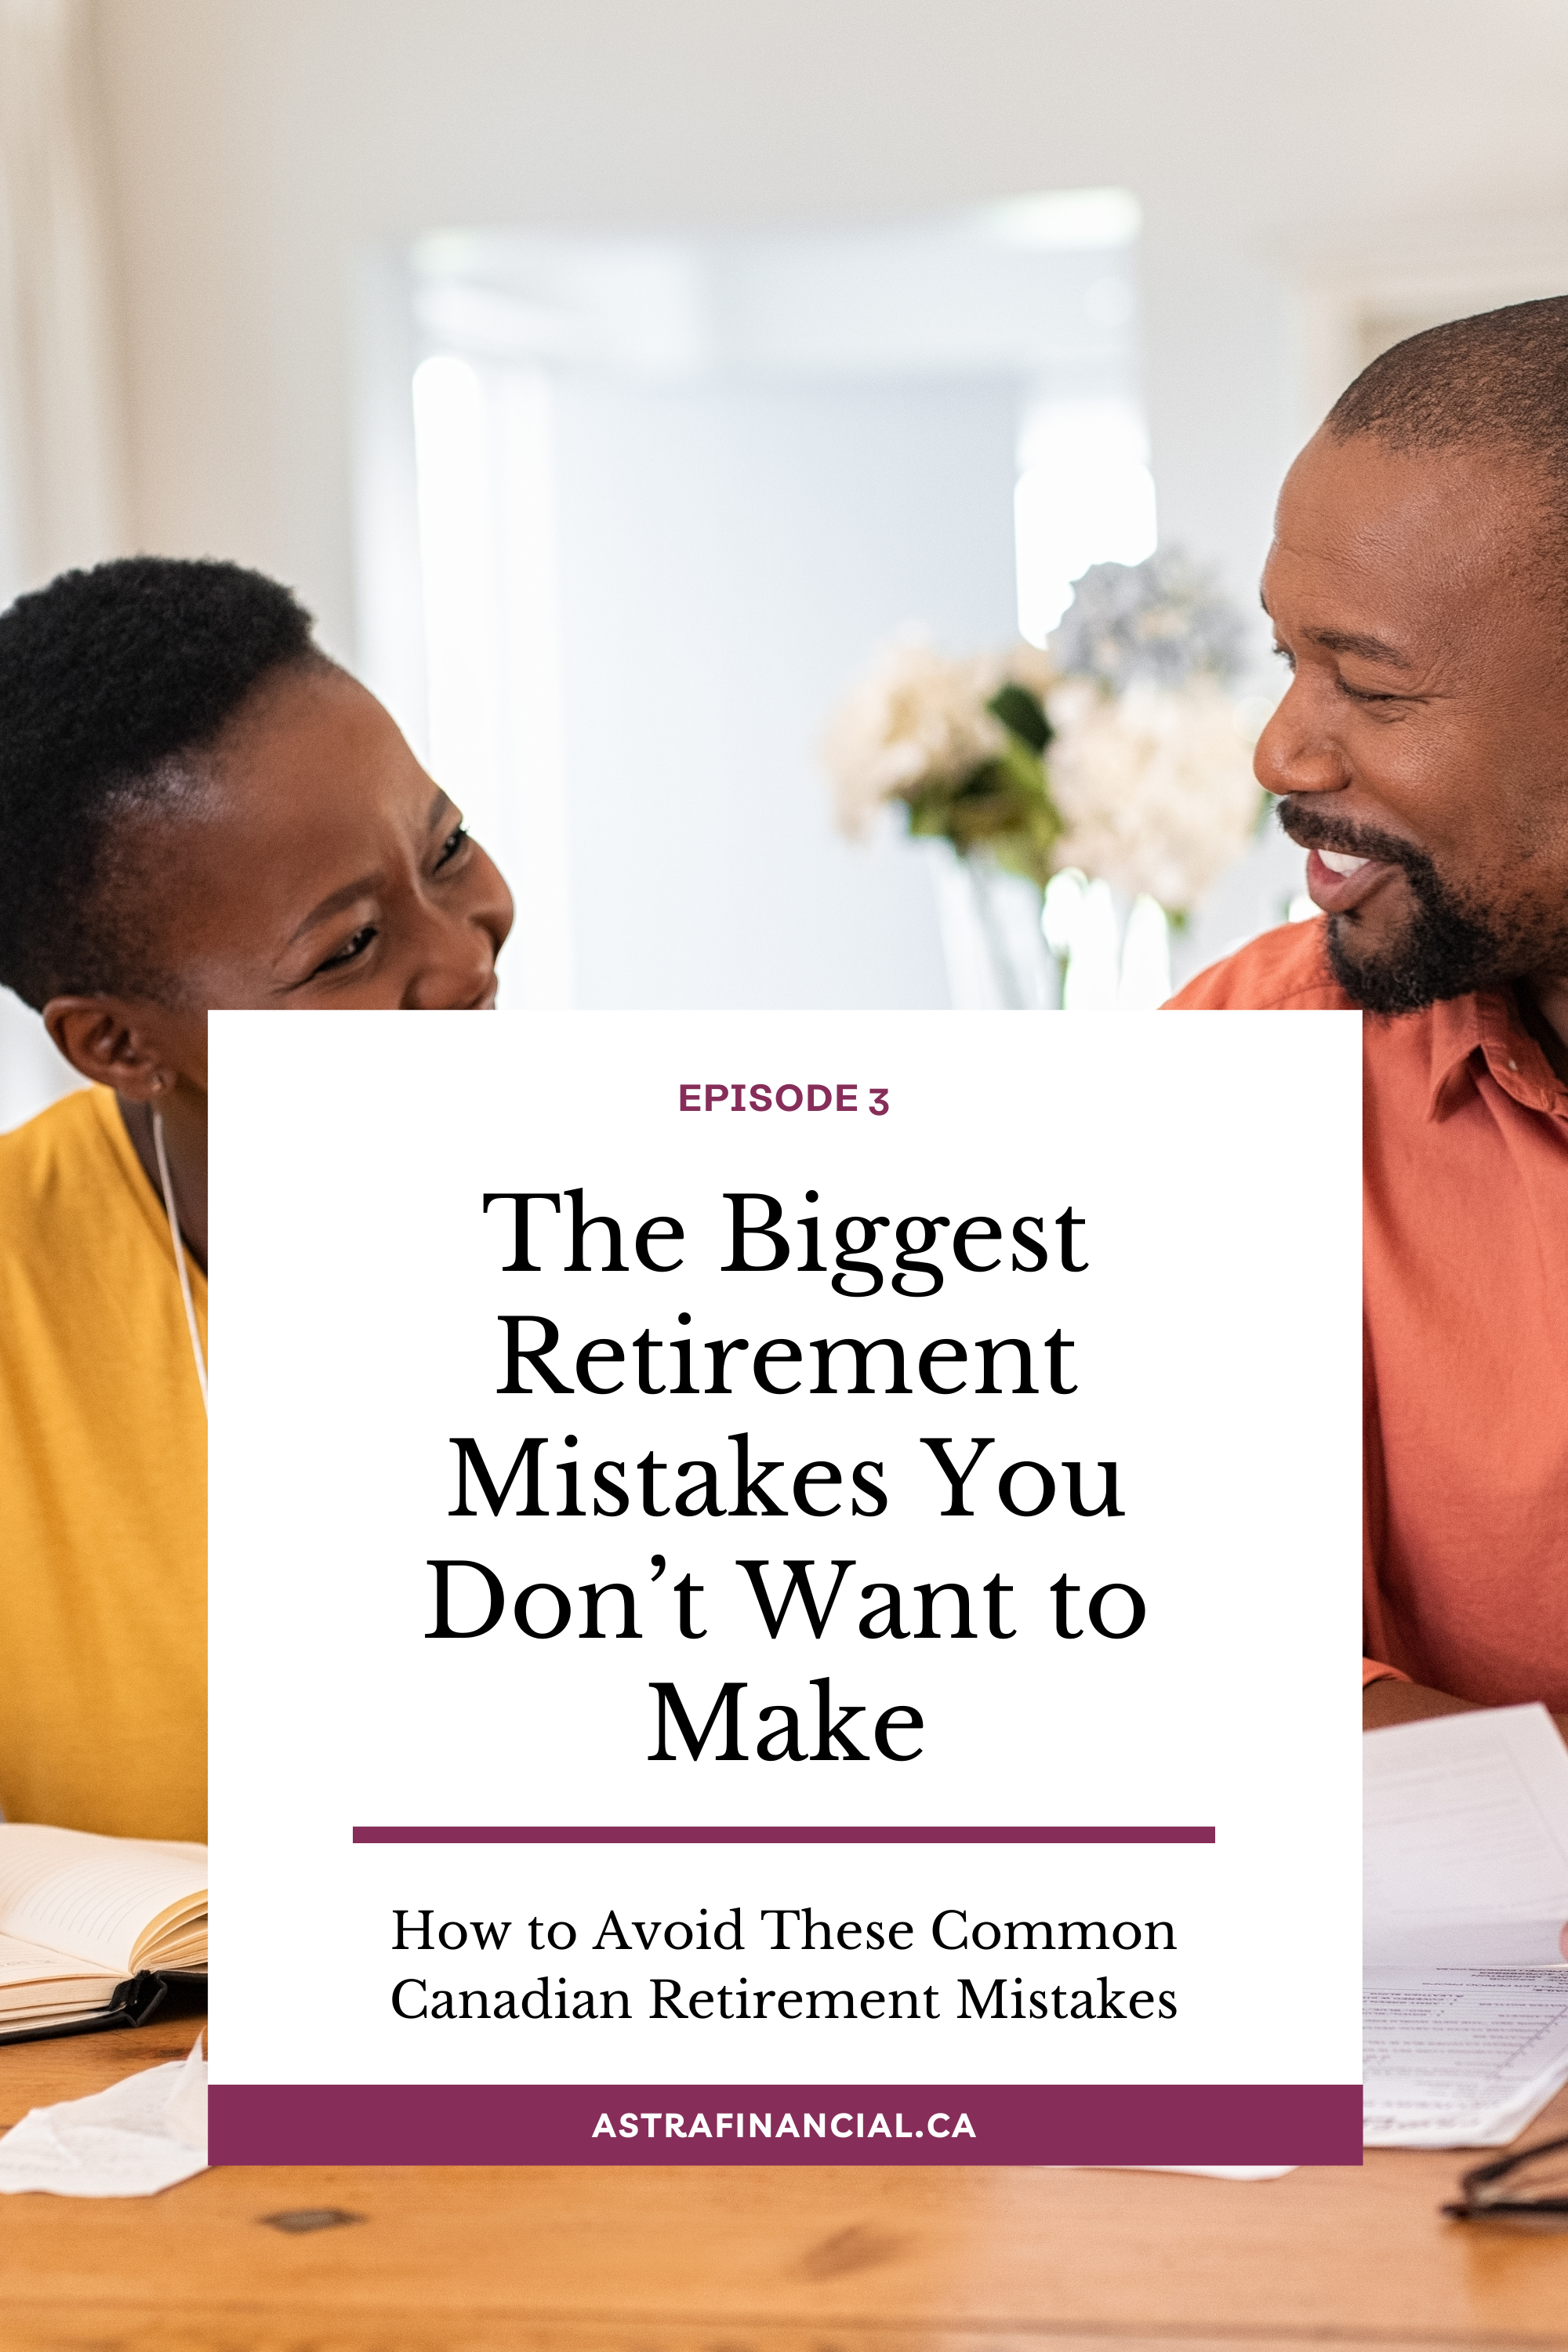 Episode 3 - The Biggest Retirement Mistakes You Don’t Want to Make by Astra Financial